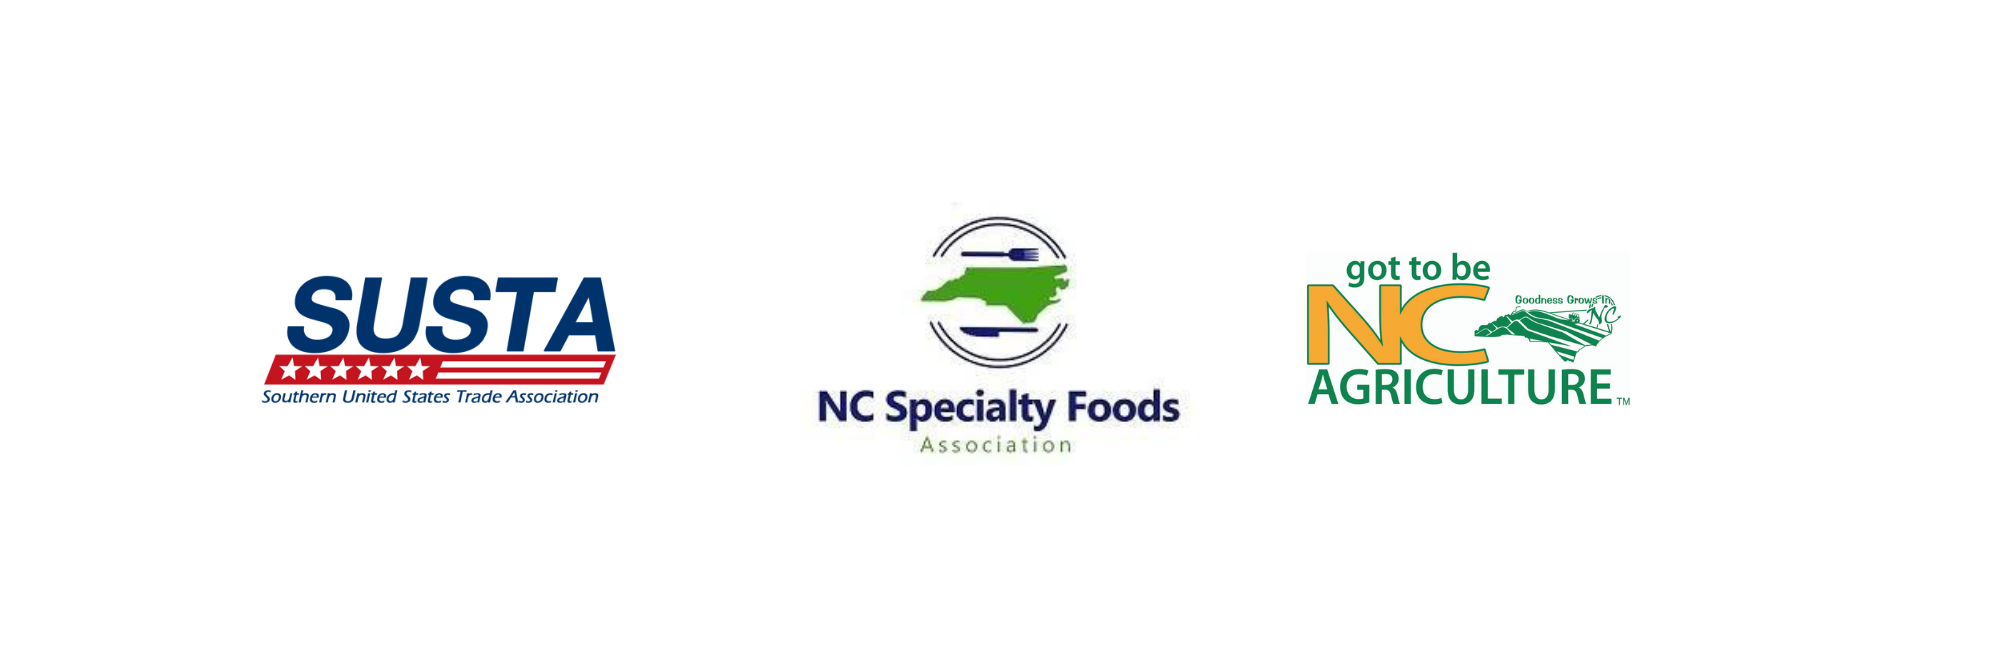 Kitcheneez is a member of SUSTA: Southern United States Trade Association, NC Specialty Foods Association and the Goodness Grows in North Carolina program.